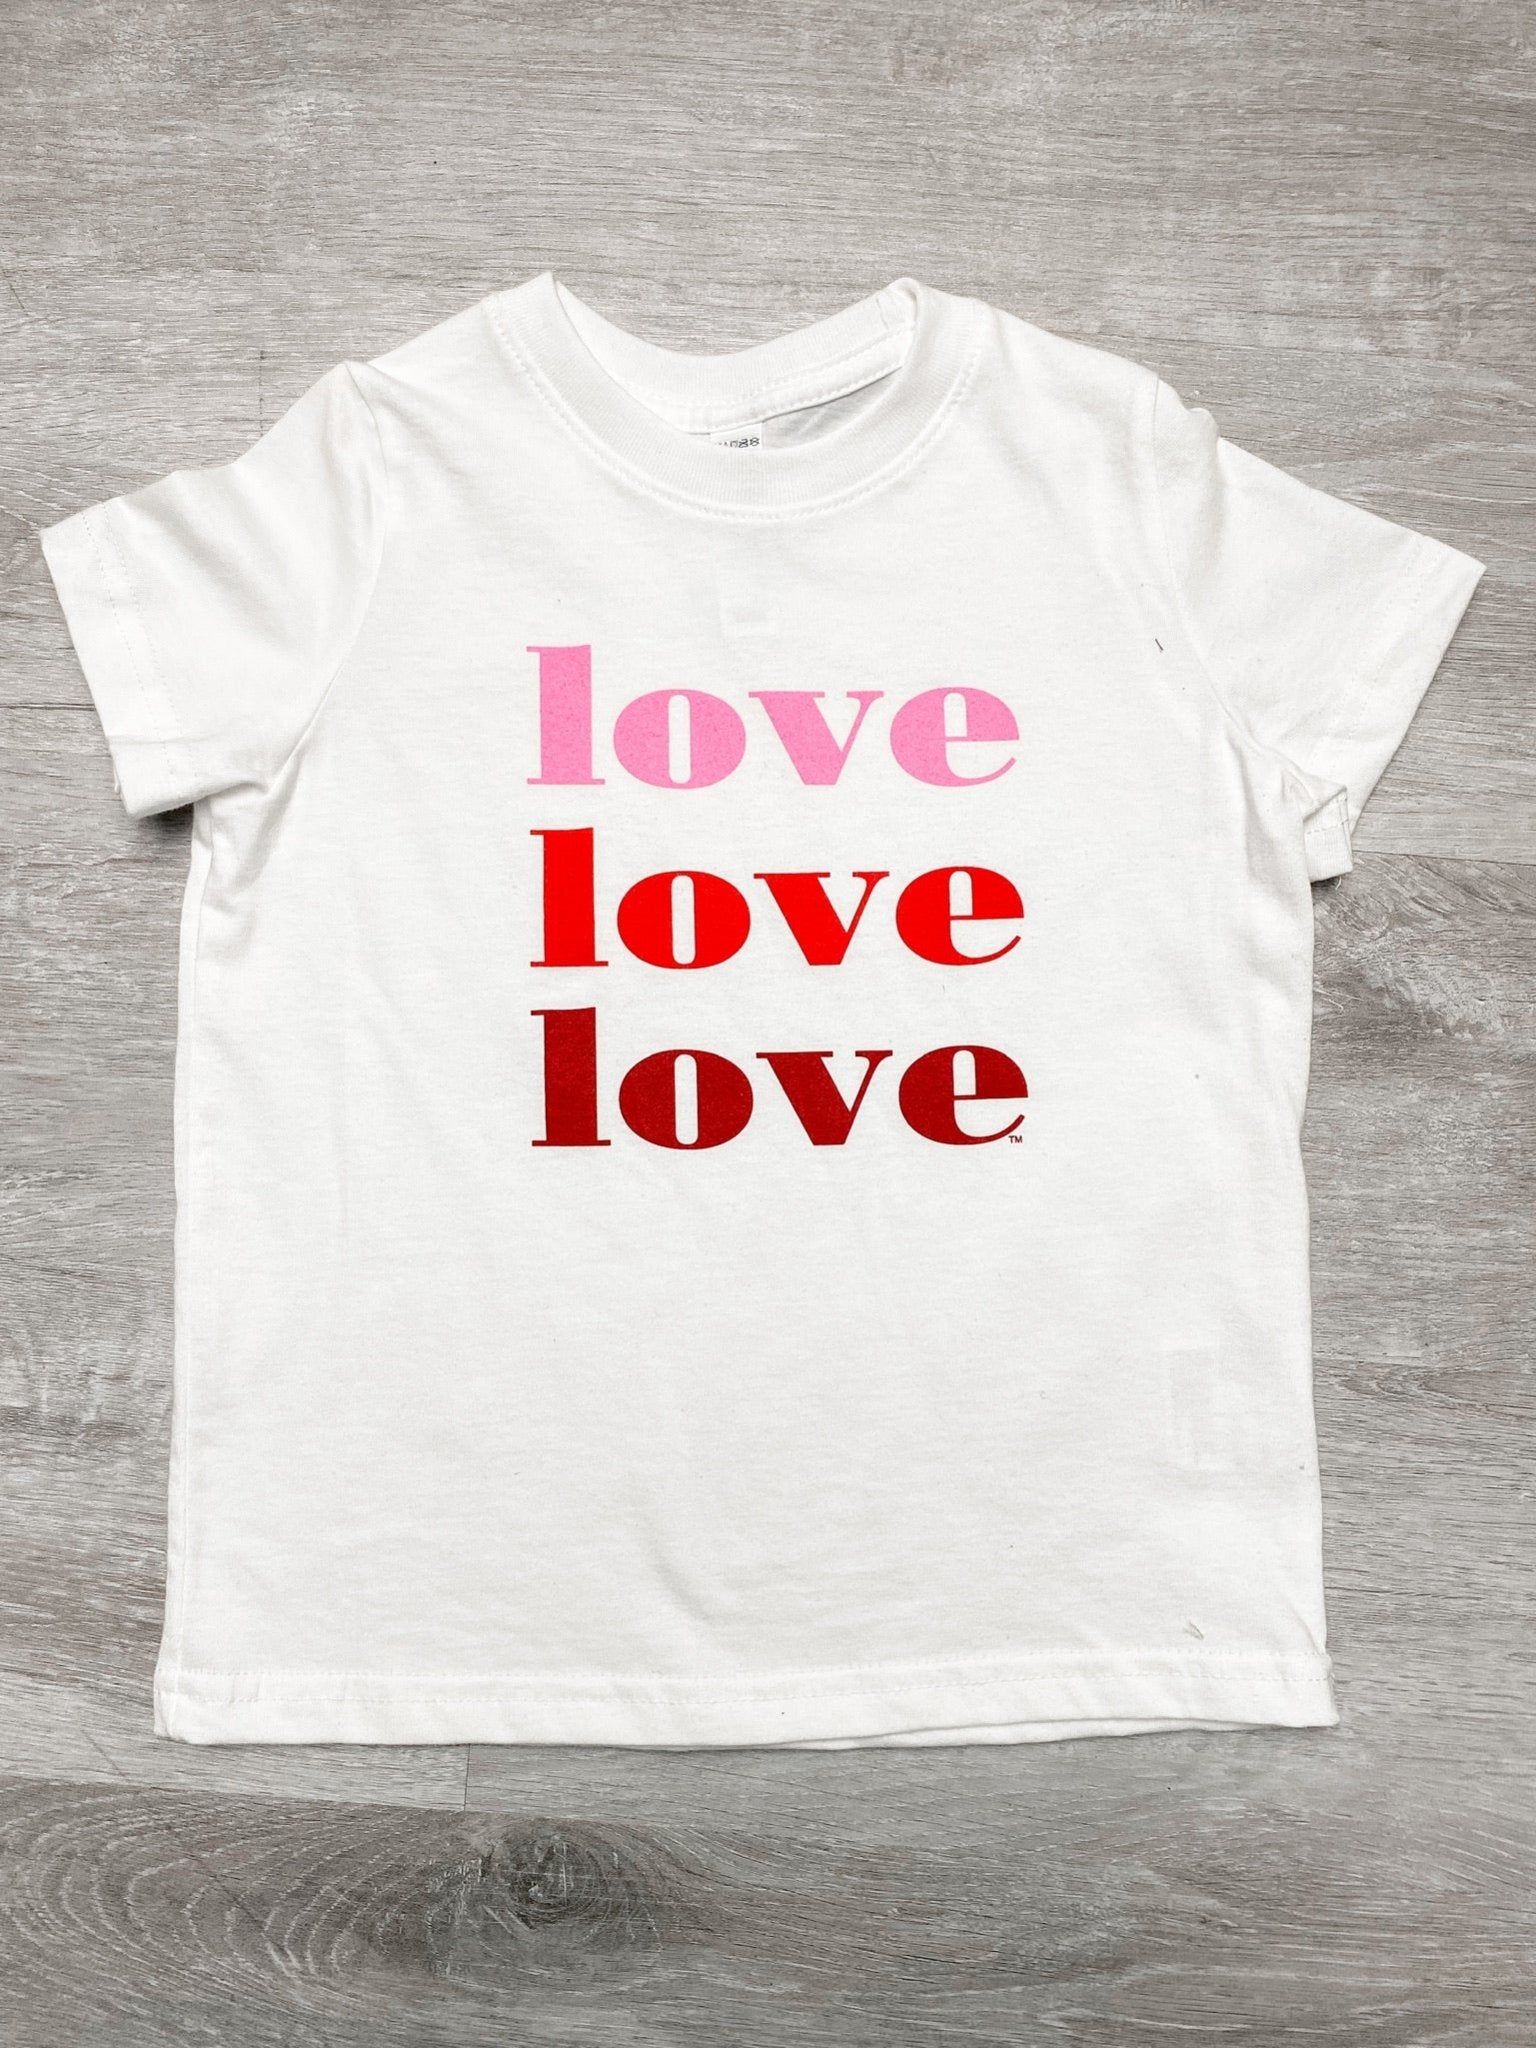 KIDS love repeater t-shirt white - Stylish T-shirts - Cute Mommy and Me Apparel at Lush Fashion Lounge Boutique in Oklahoma